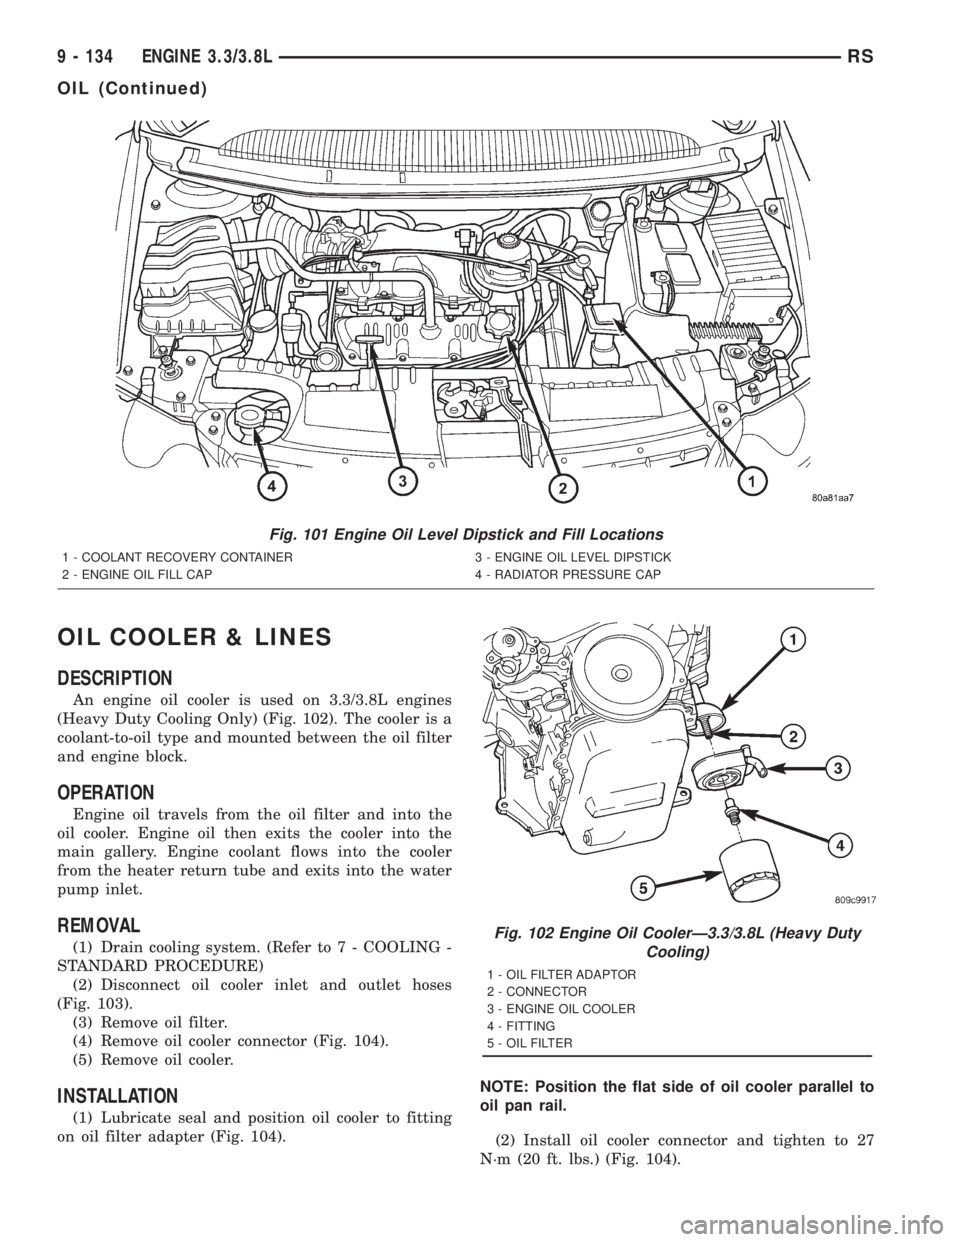 CHRYSLER VOYAGER 2001  Service Manual OIL COOLER & LINES
DESCRIPTION
An engine oil cooler is used on 3.3/3.8L engines
(Heavy Duty Cooling Only) (Fig. 102). The cooler is a
coolant-to-oil type and mounted between the oil filter
and engine 